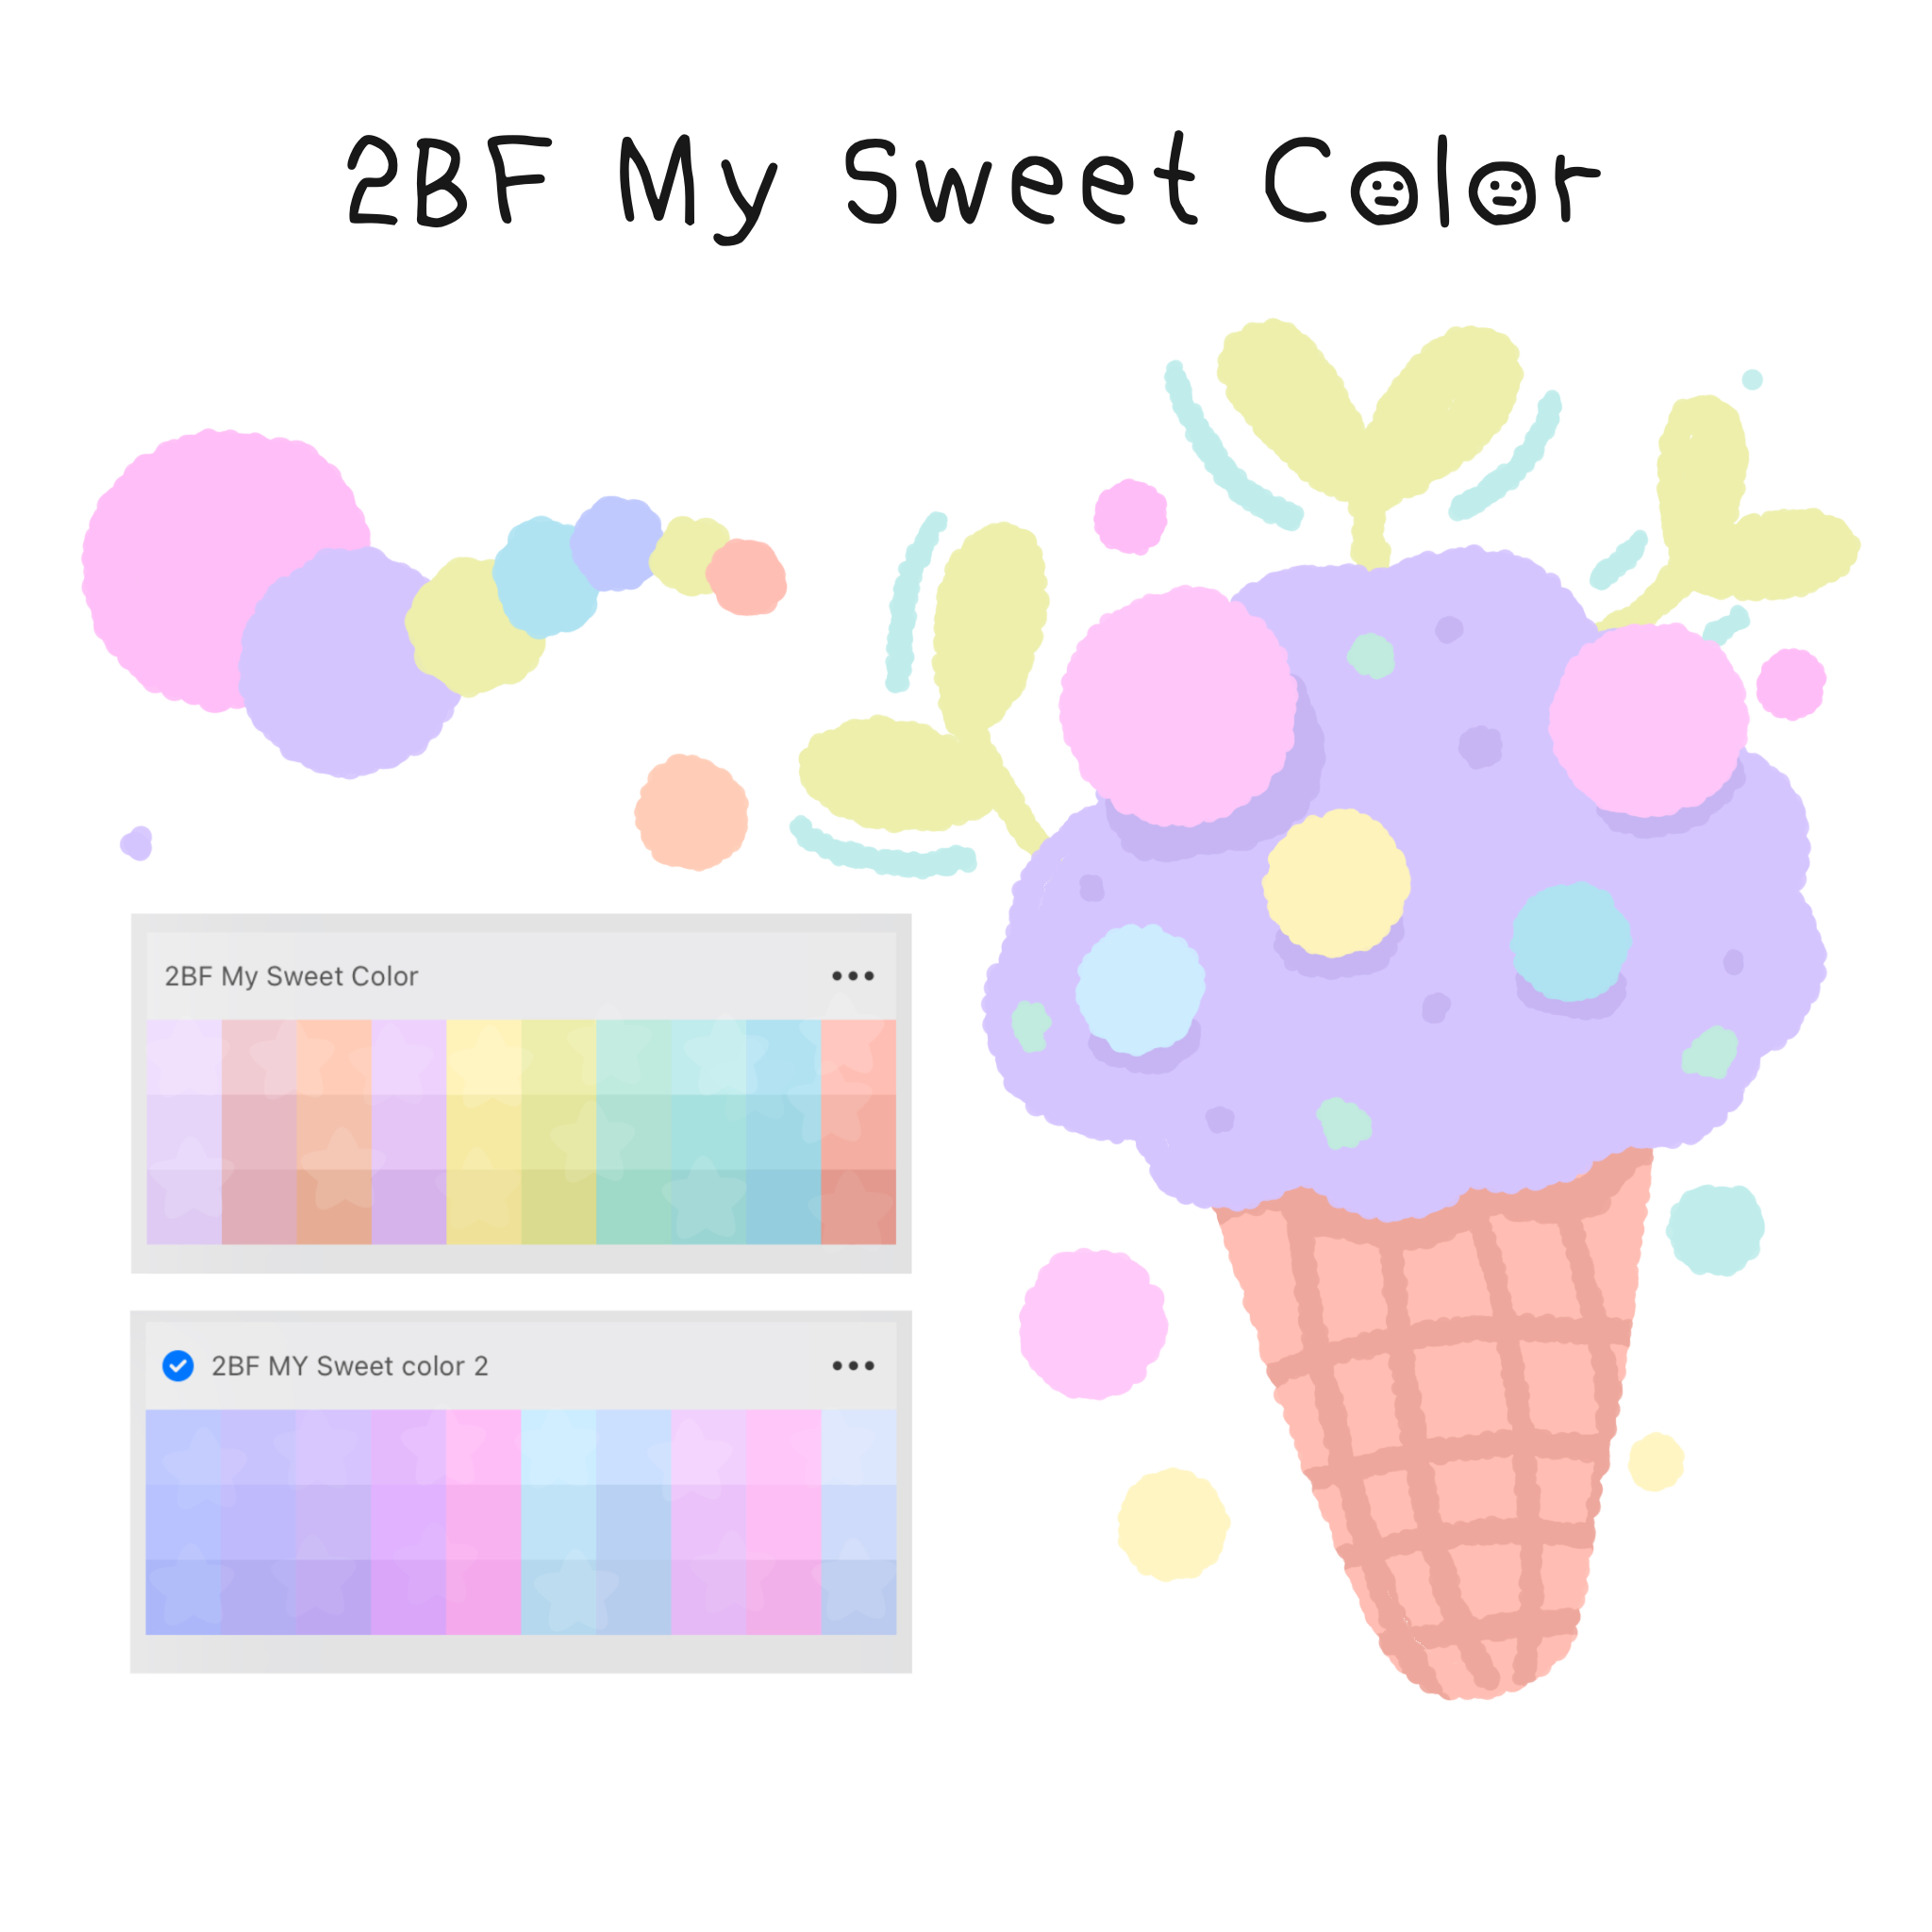 2BF My Sweet Color